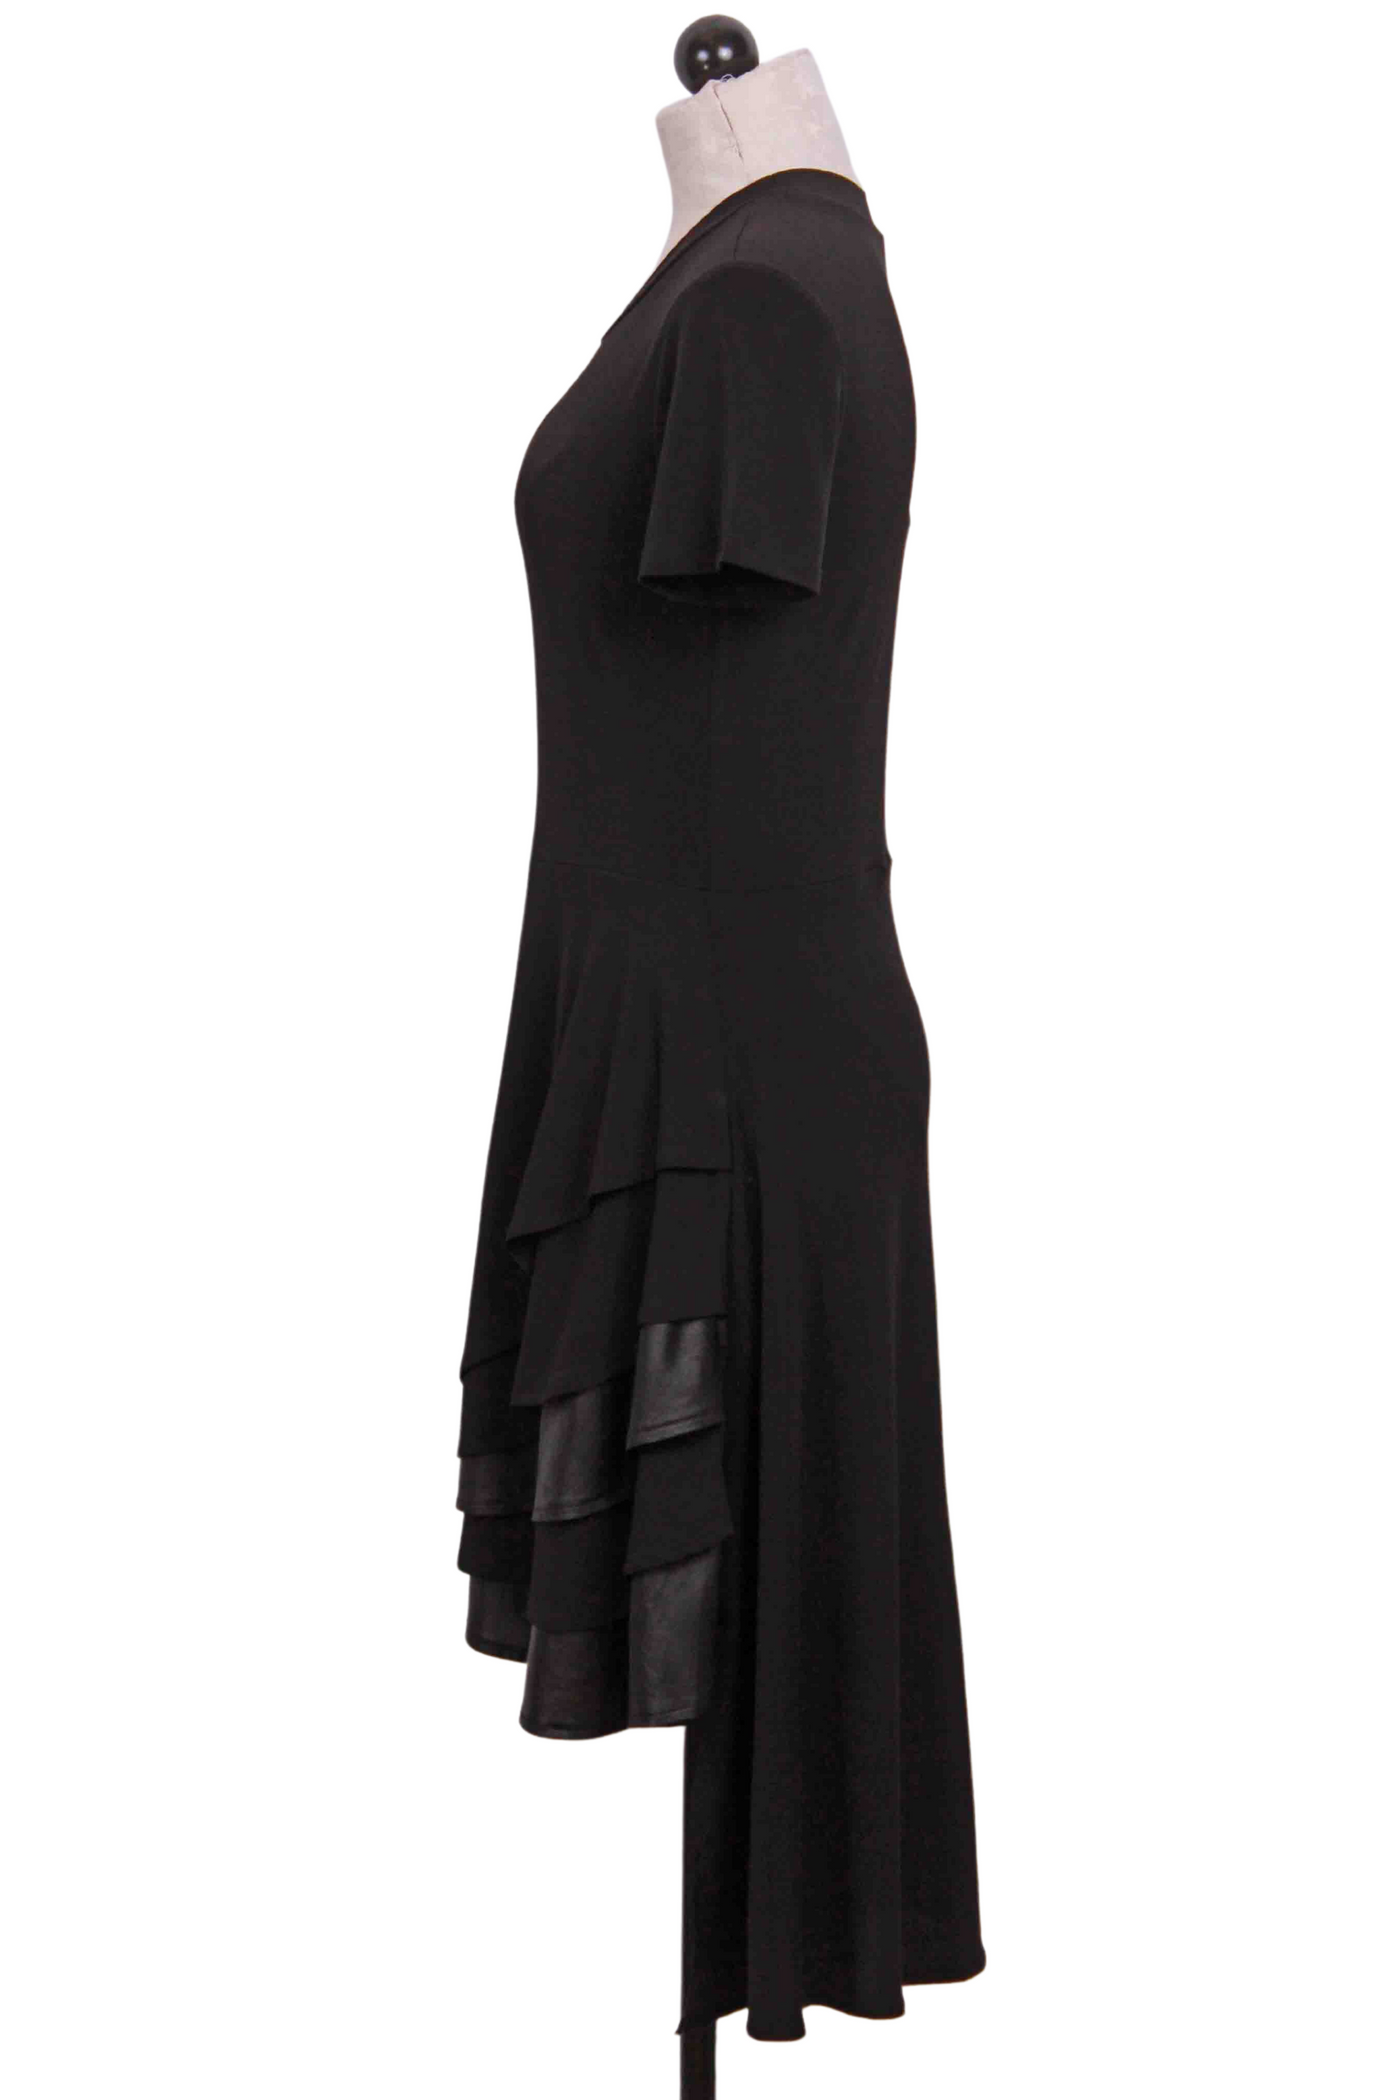 side view of Black Drake Dress by Kozan with curved ruffle hem